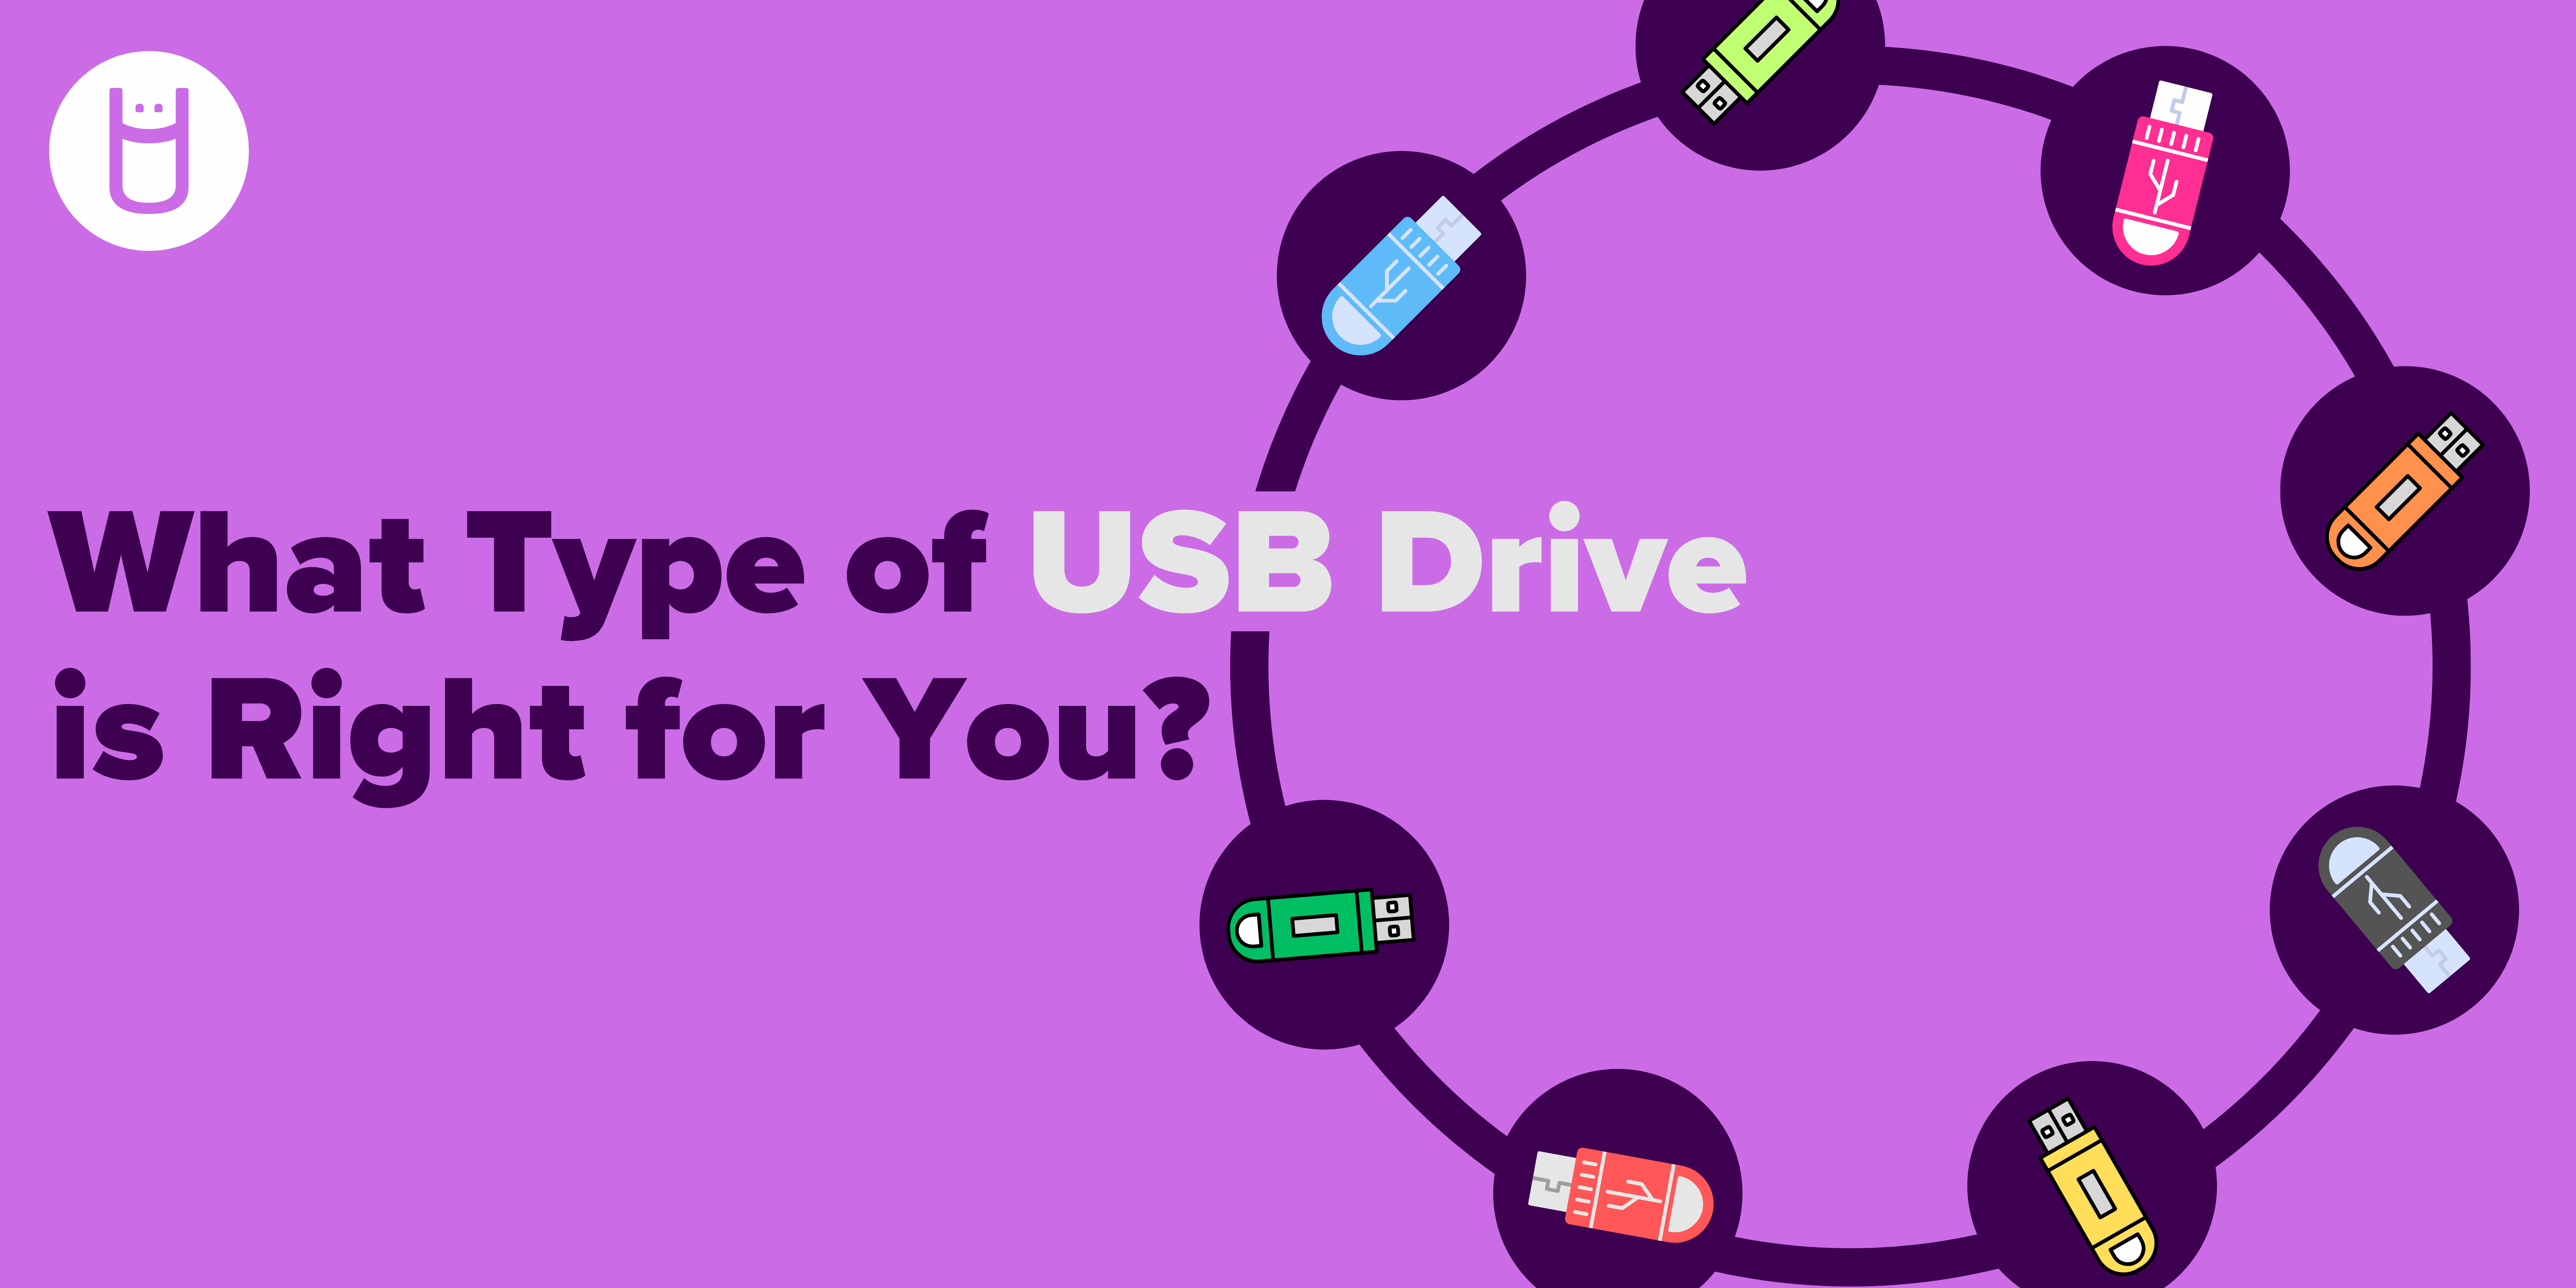 What type of USB drive is right for you